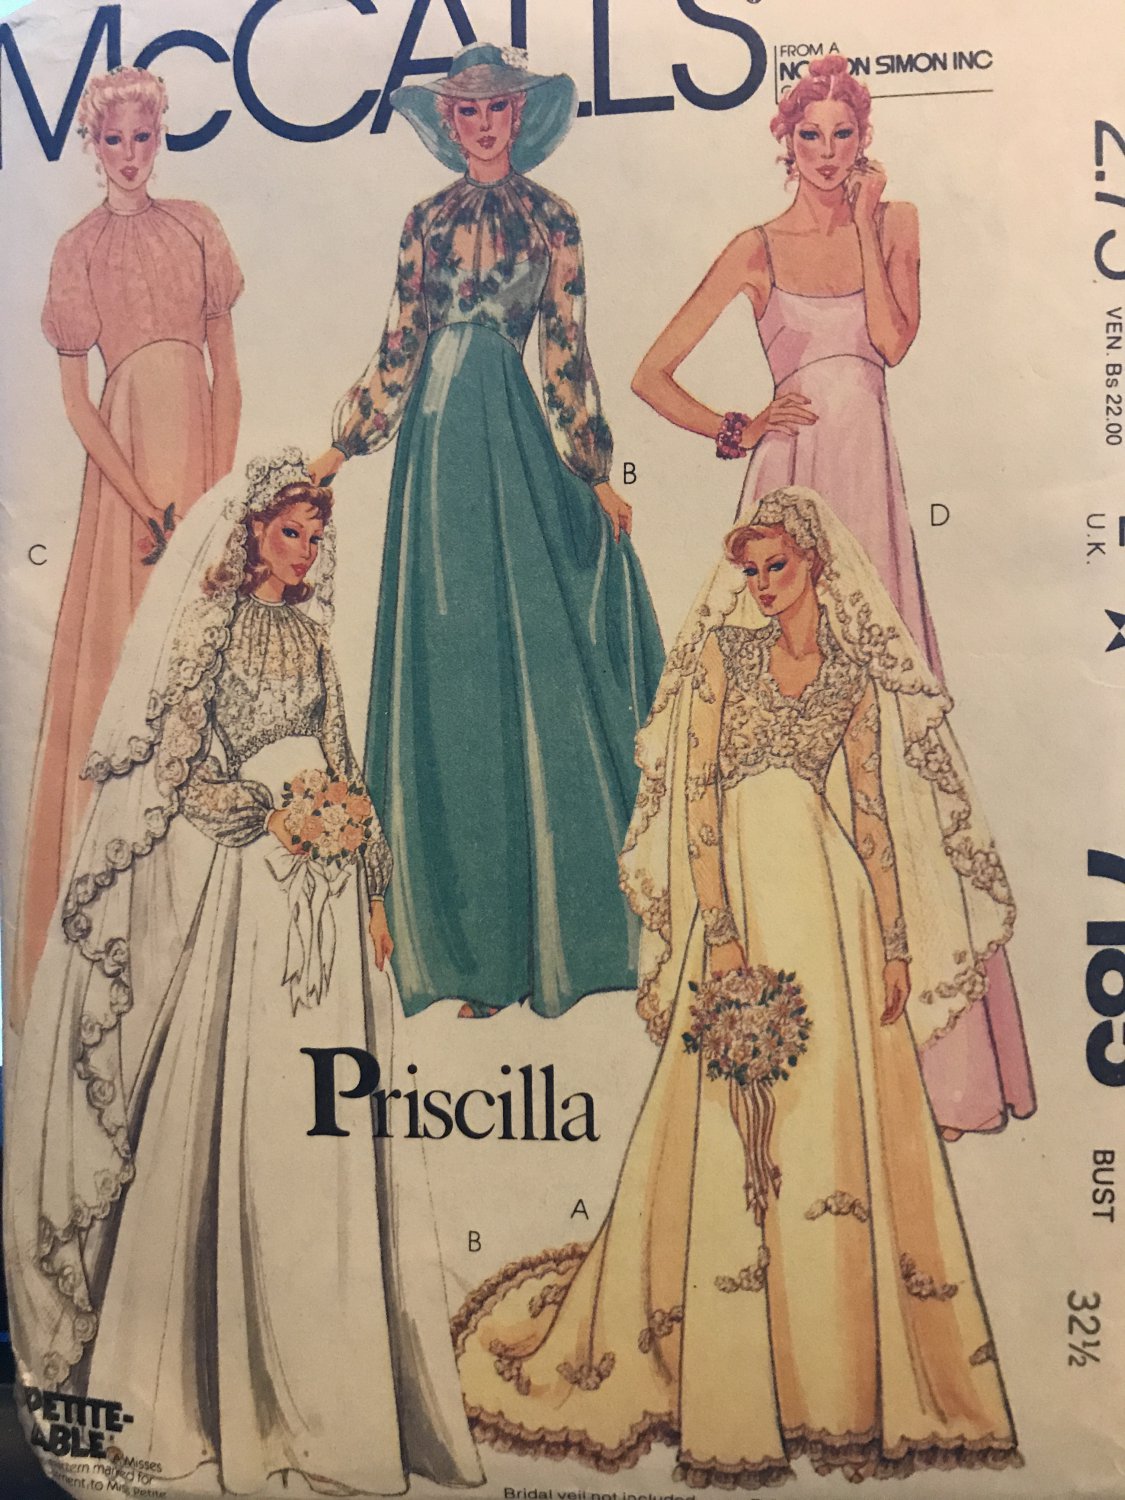 McCall's 7185 Pricilla Back zippered bridal or bridesmaid gown Sewing Pattern size 10 bust 32 1/2"